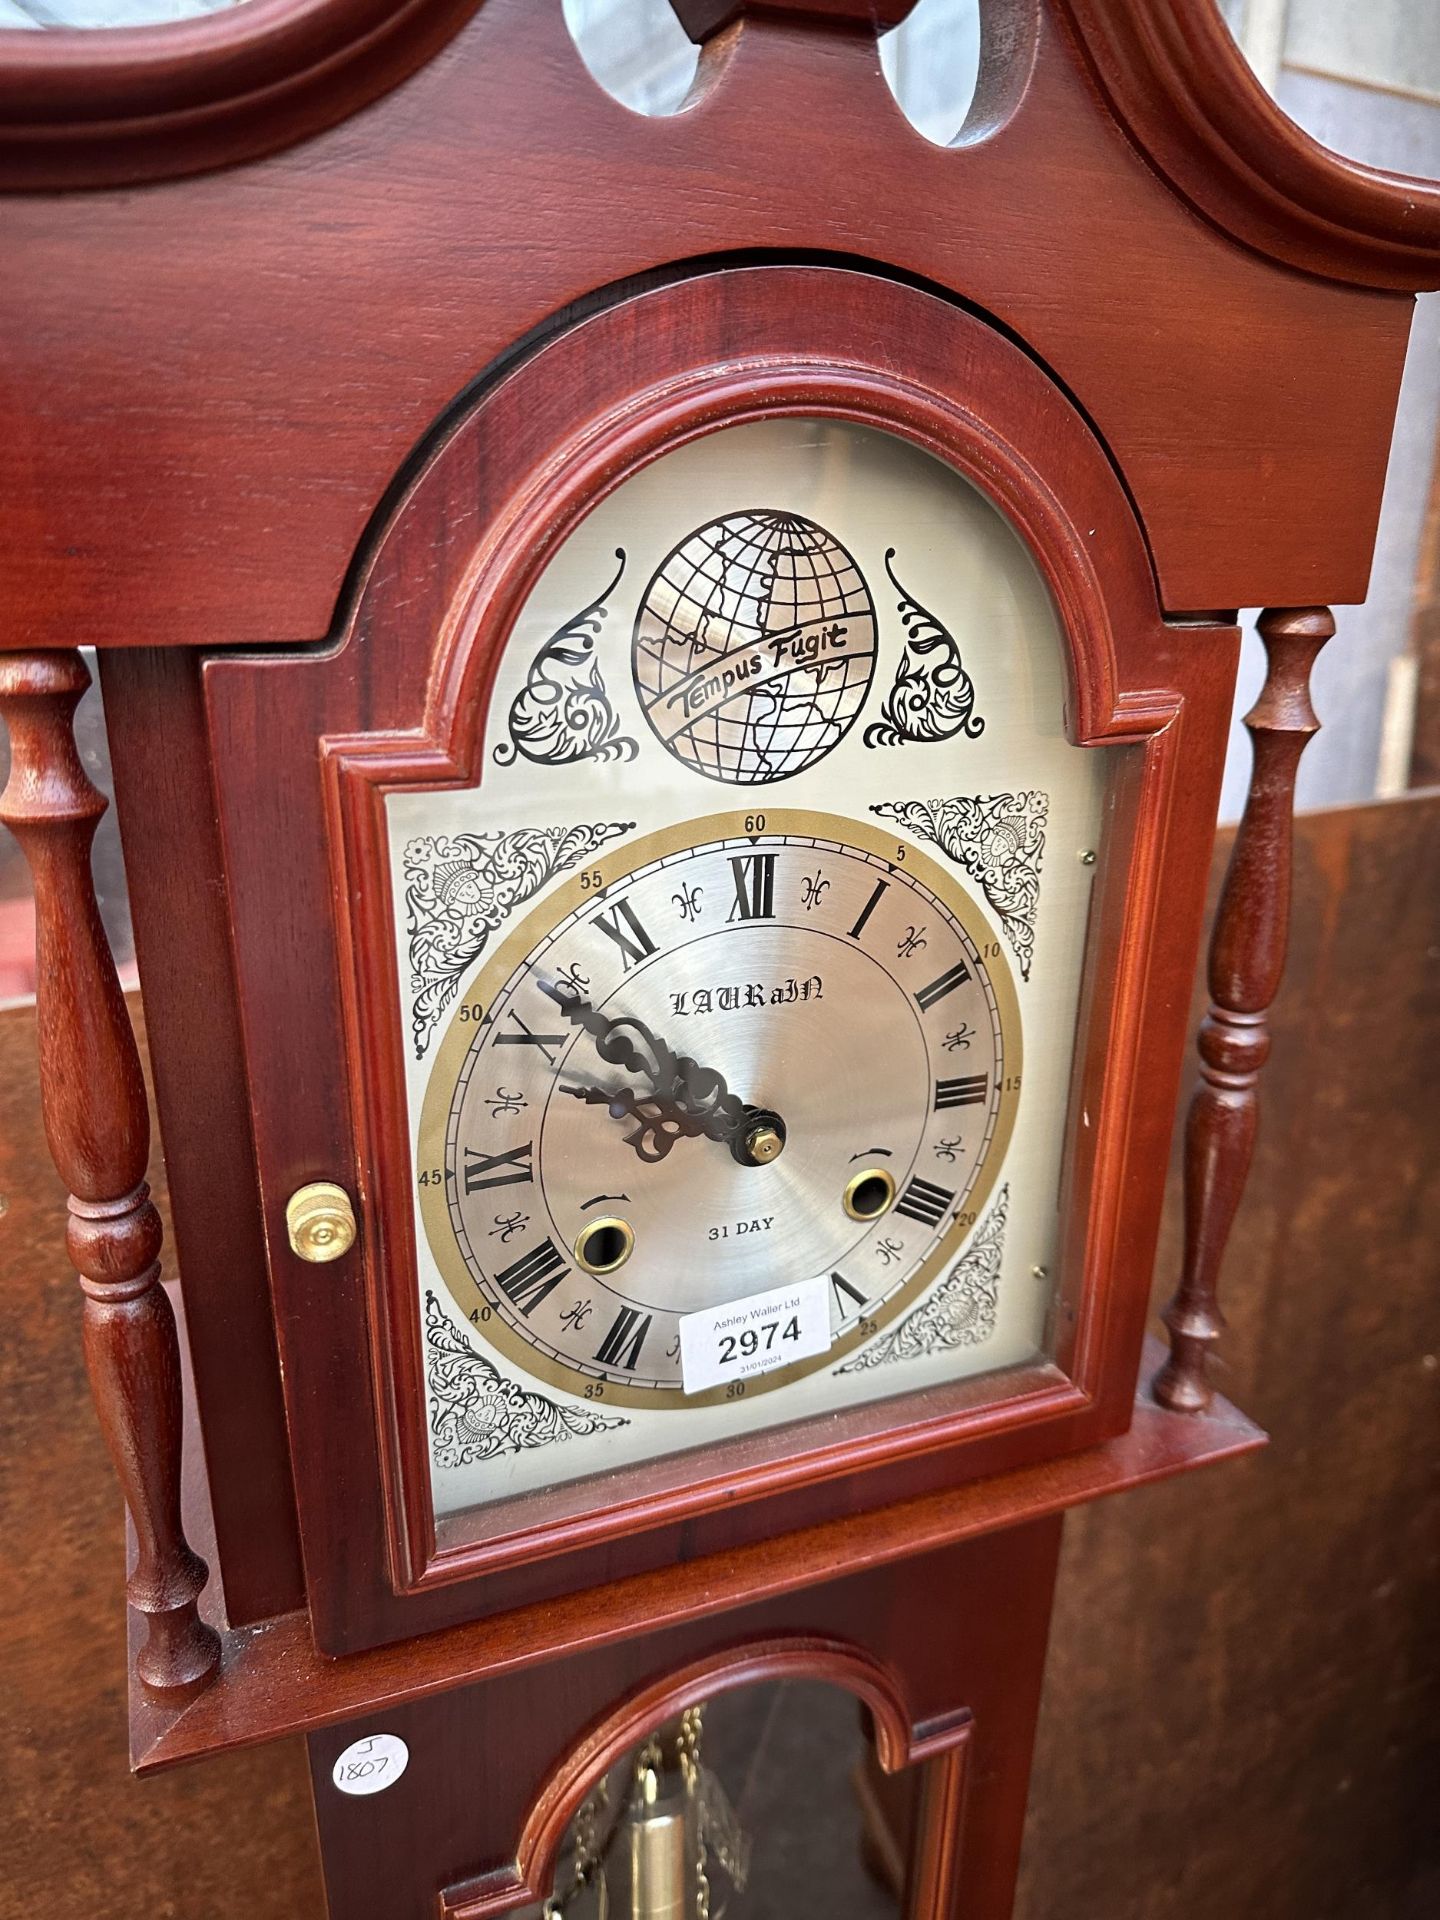 A TEMPUS FUGIT 31 DAY GRANDMOTHER CLOCK WITH GLASS DOOR AND THREE WEIGHTS - Image 2 of 3